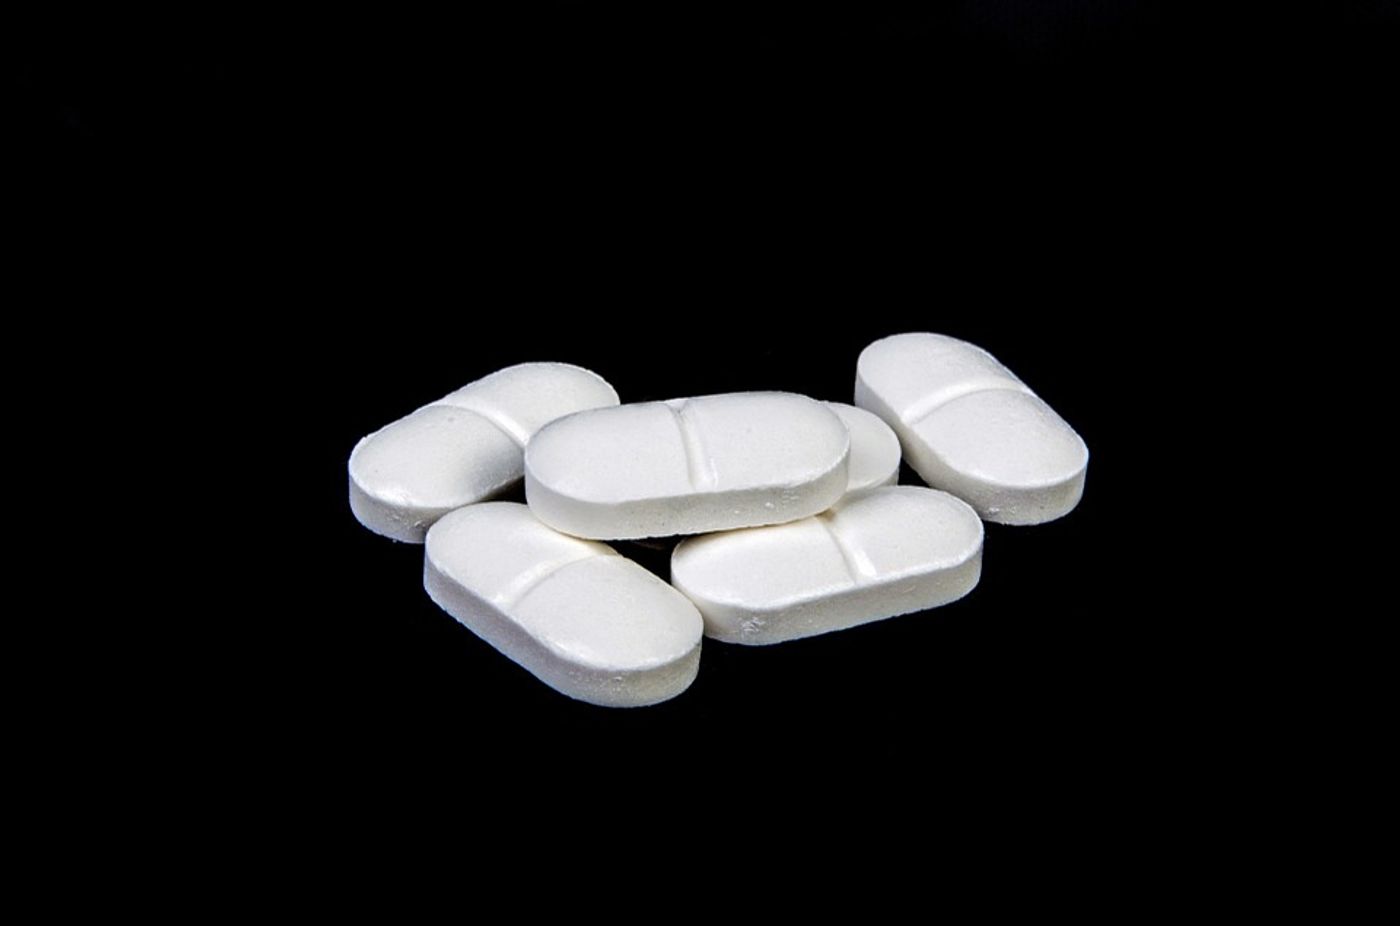 What role can aspirin play for women with breast cancer? Photo: Pixabay